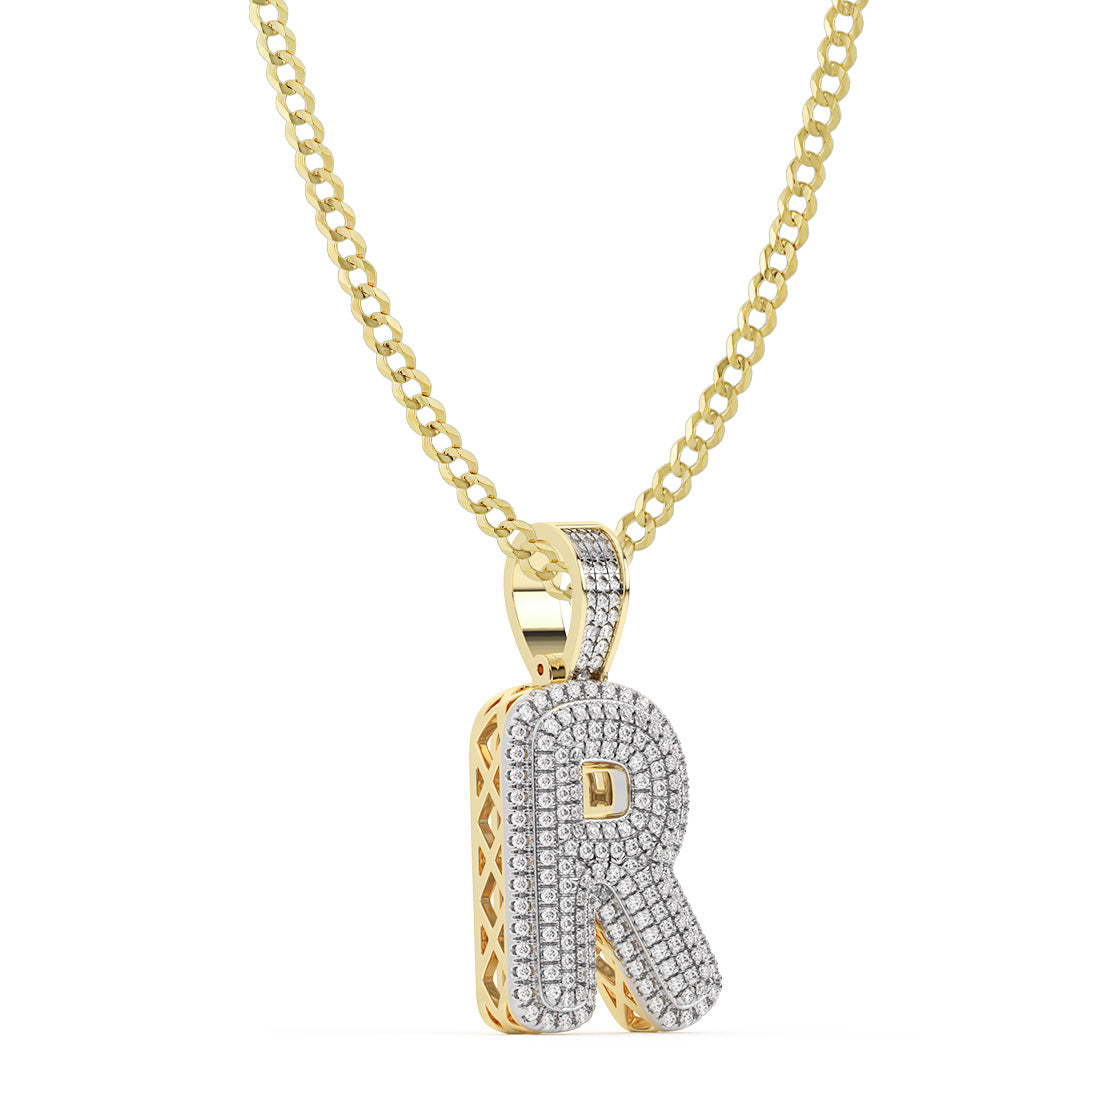 Diamond "R" Initial Letter Necklace 0.42ct Solid 10K Yellow Gold